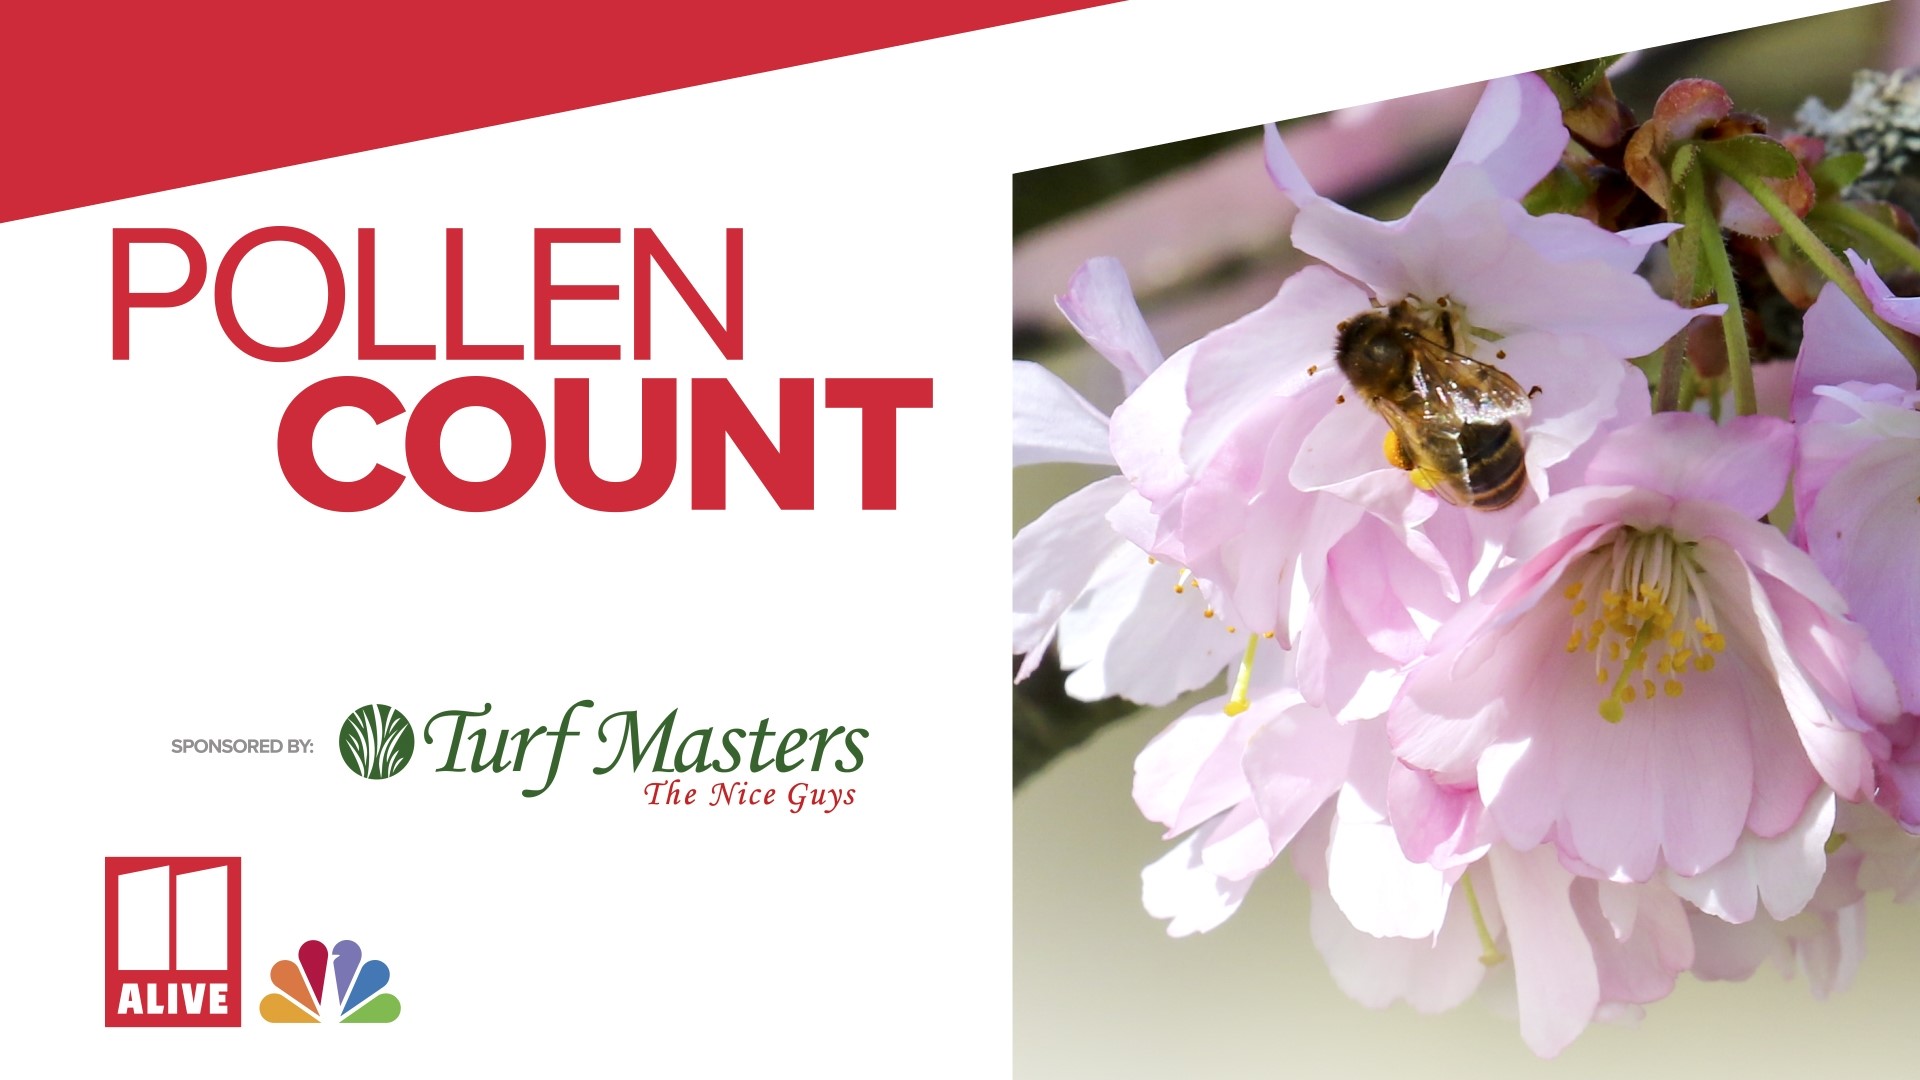 Tracking north Georgia's daily pollen count, sponsored by Turf Masters.